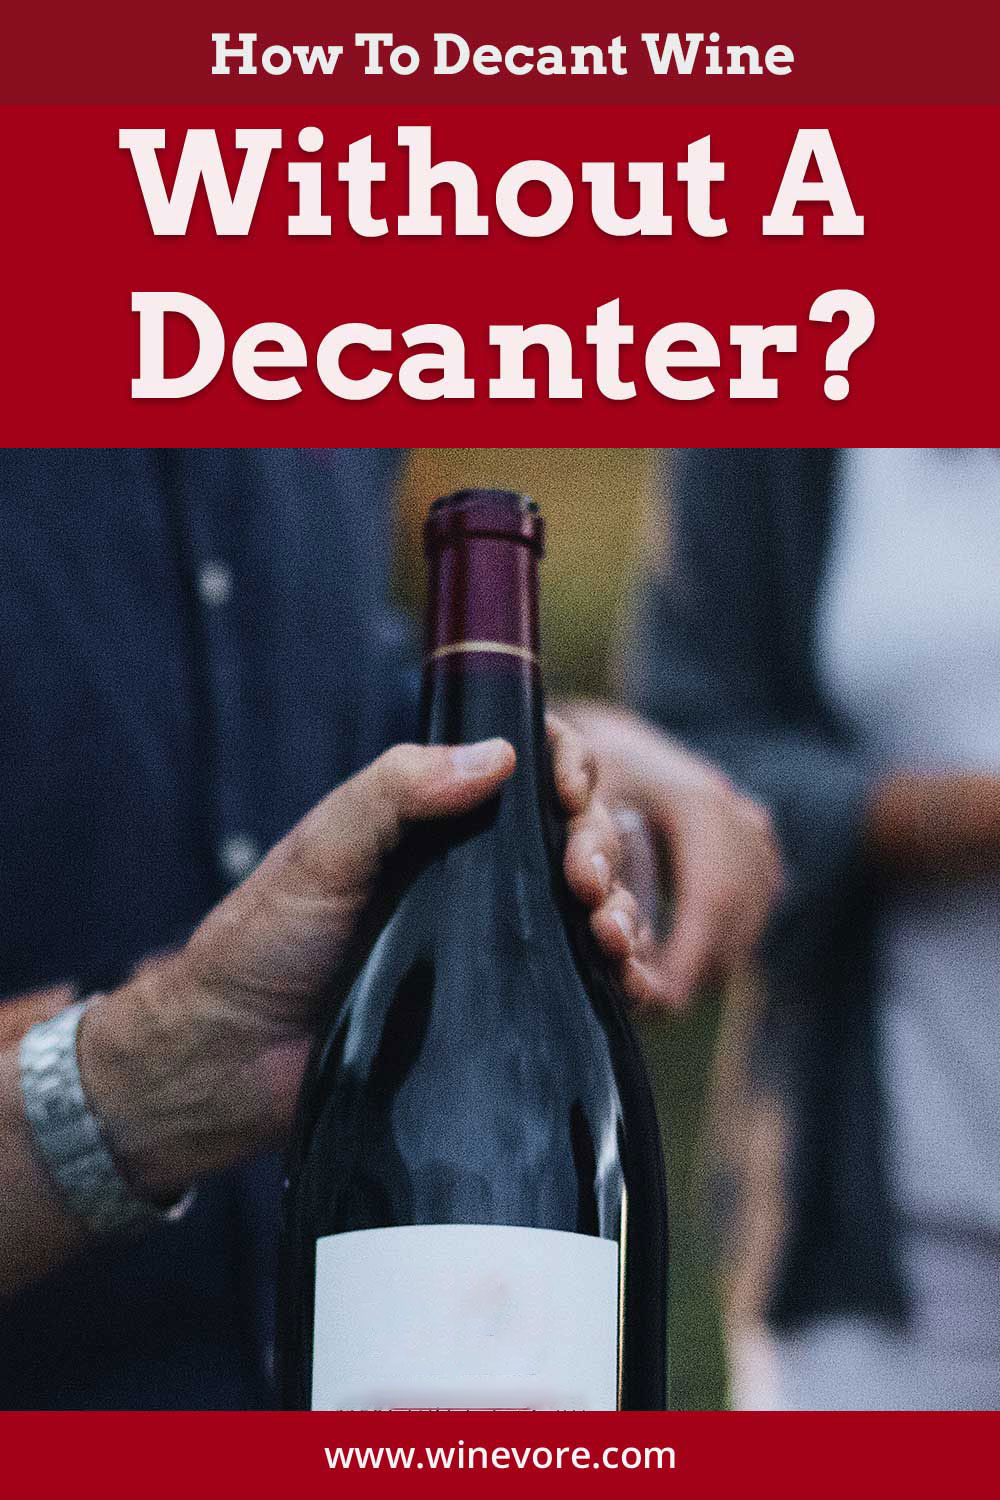 Wine bottle in a man's hand - How To Decant Wine Without A Decanter?